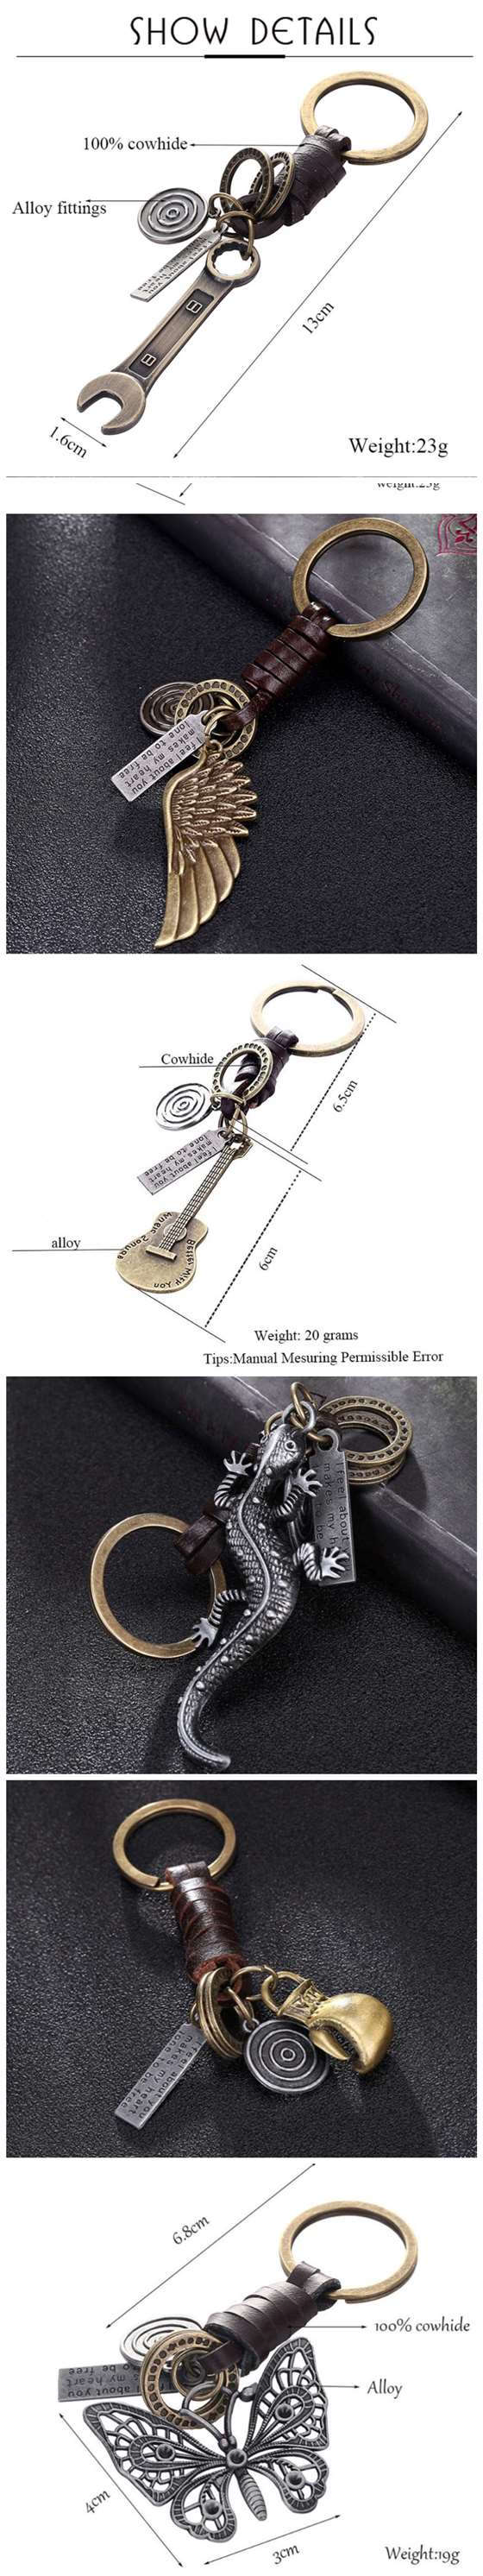 JewelryBund Stealth Aircraft Pendant Vintage Style Key Chain/ Key Accessories - Copper